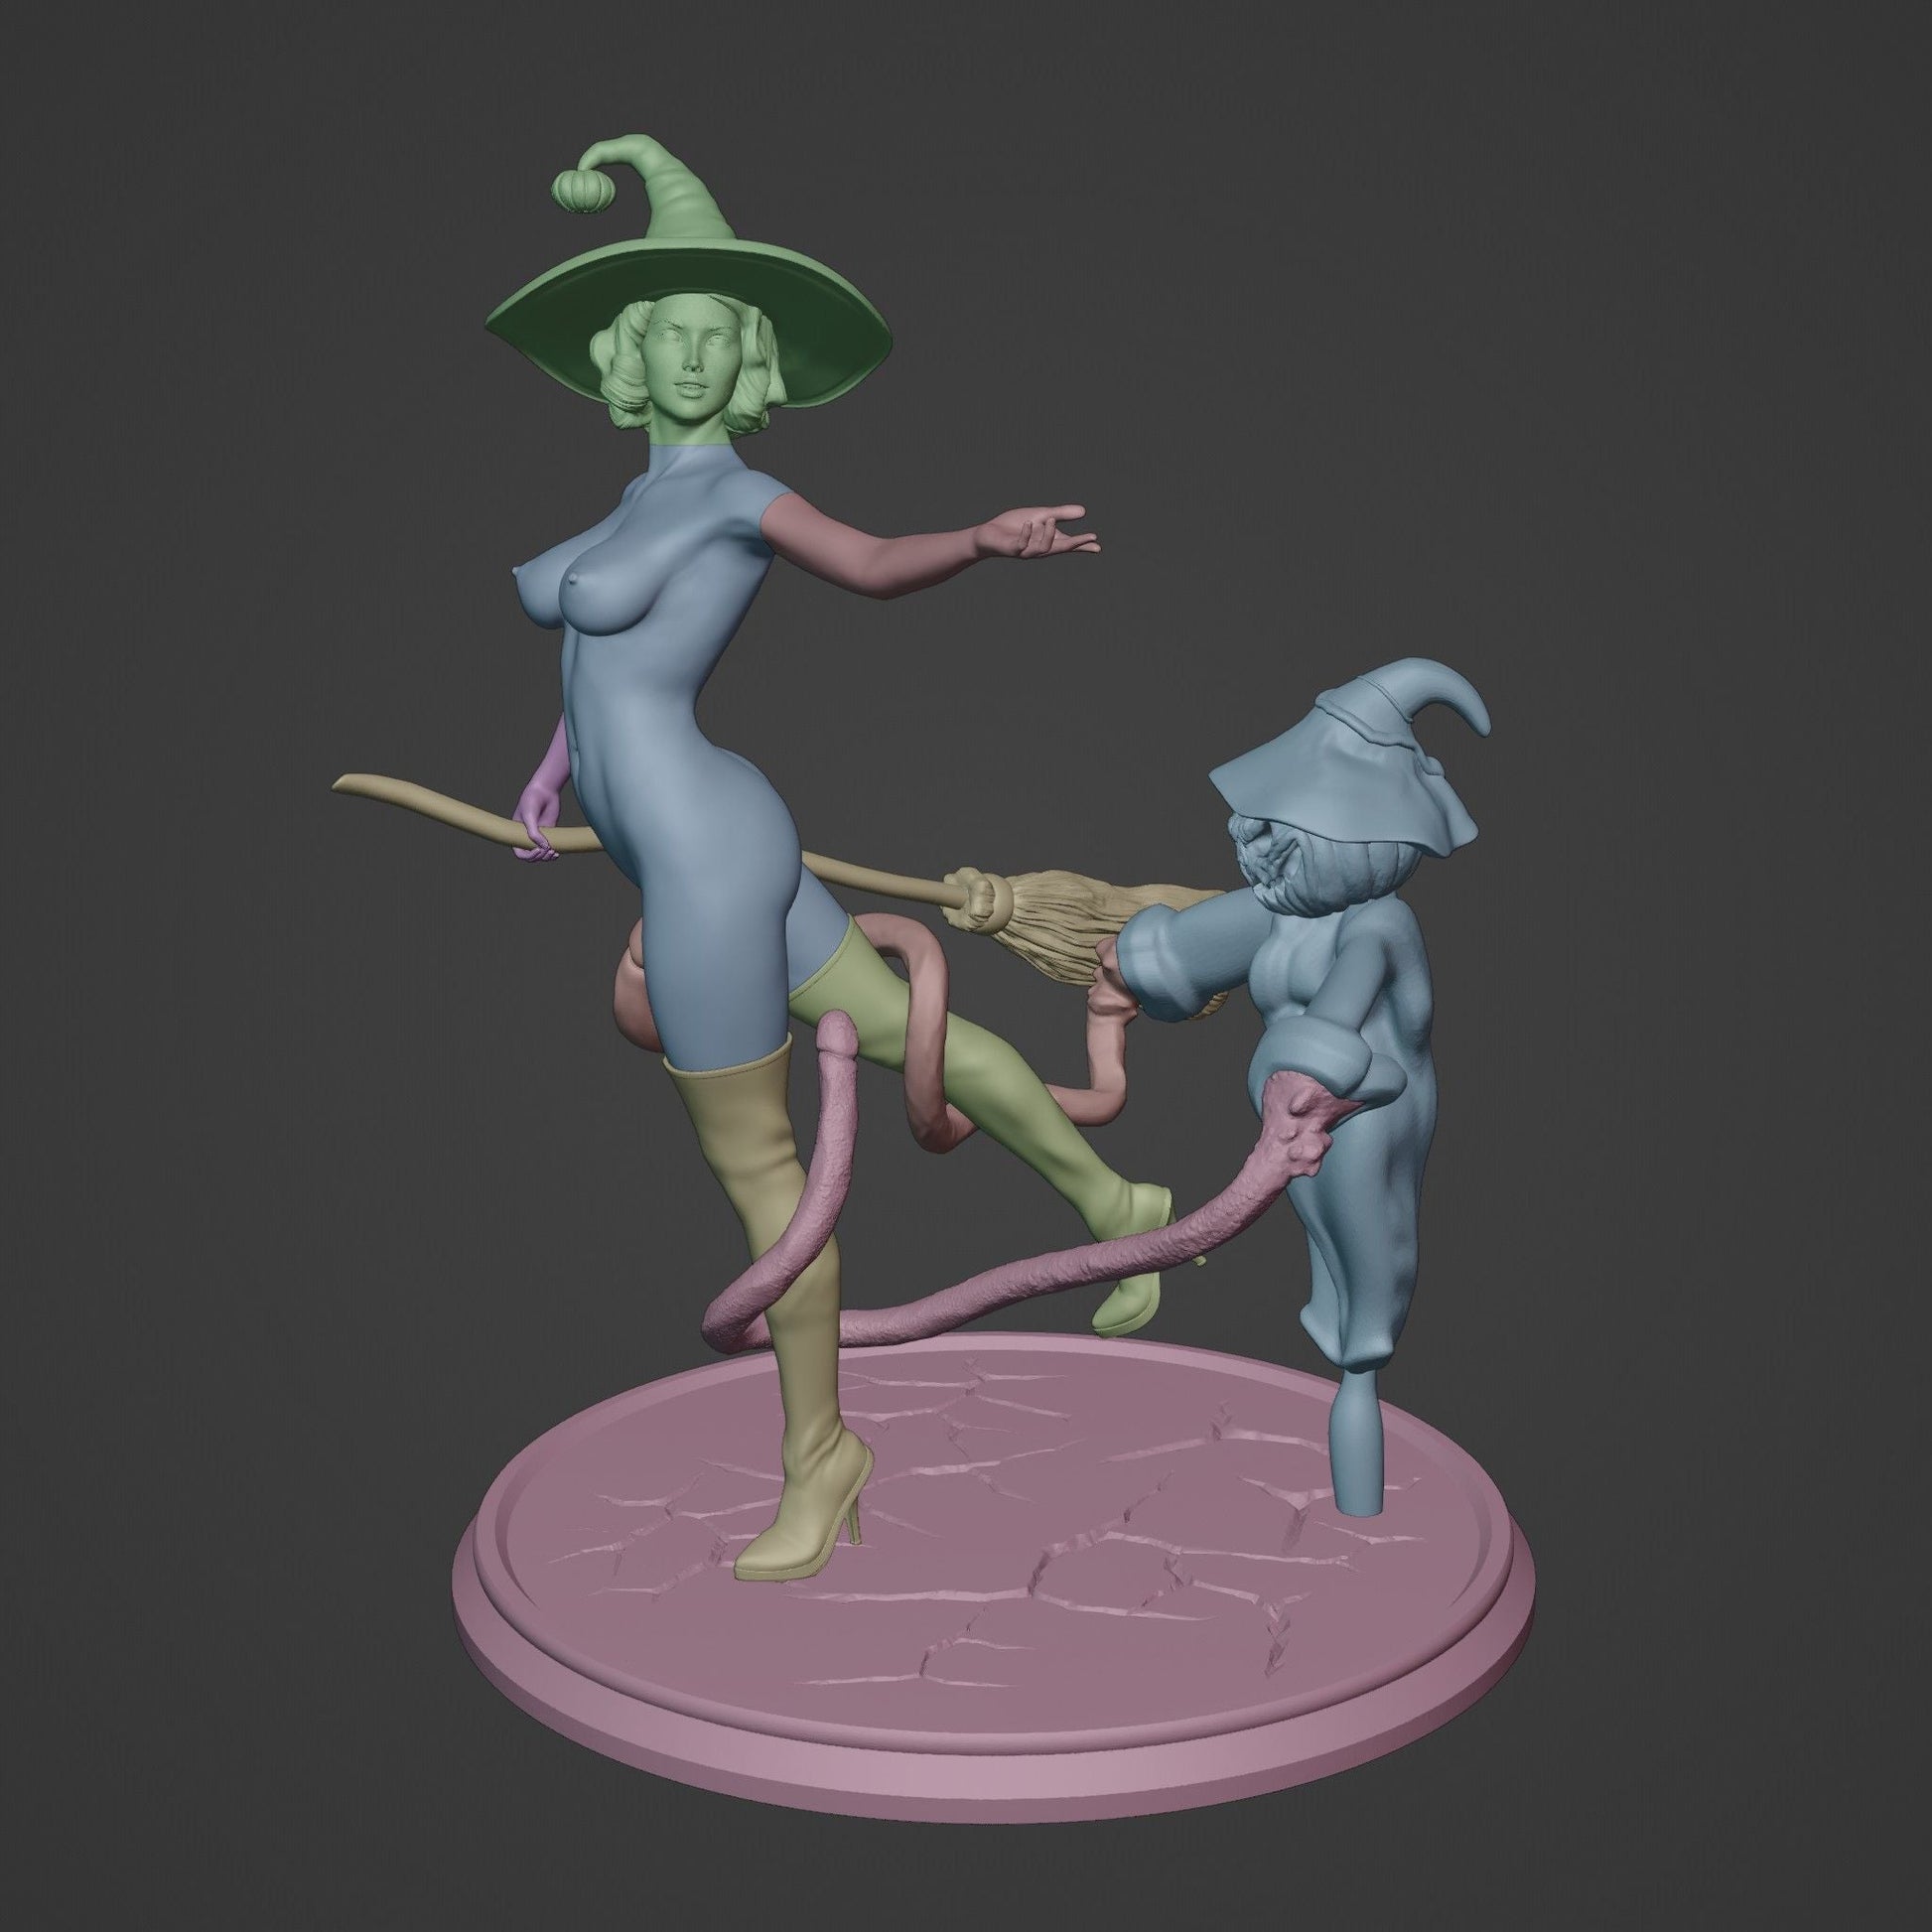 Witches fun on Halloween | 3D Printed | Funart | Unpainted | NSFW | Figurine